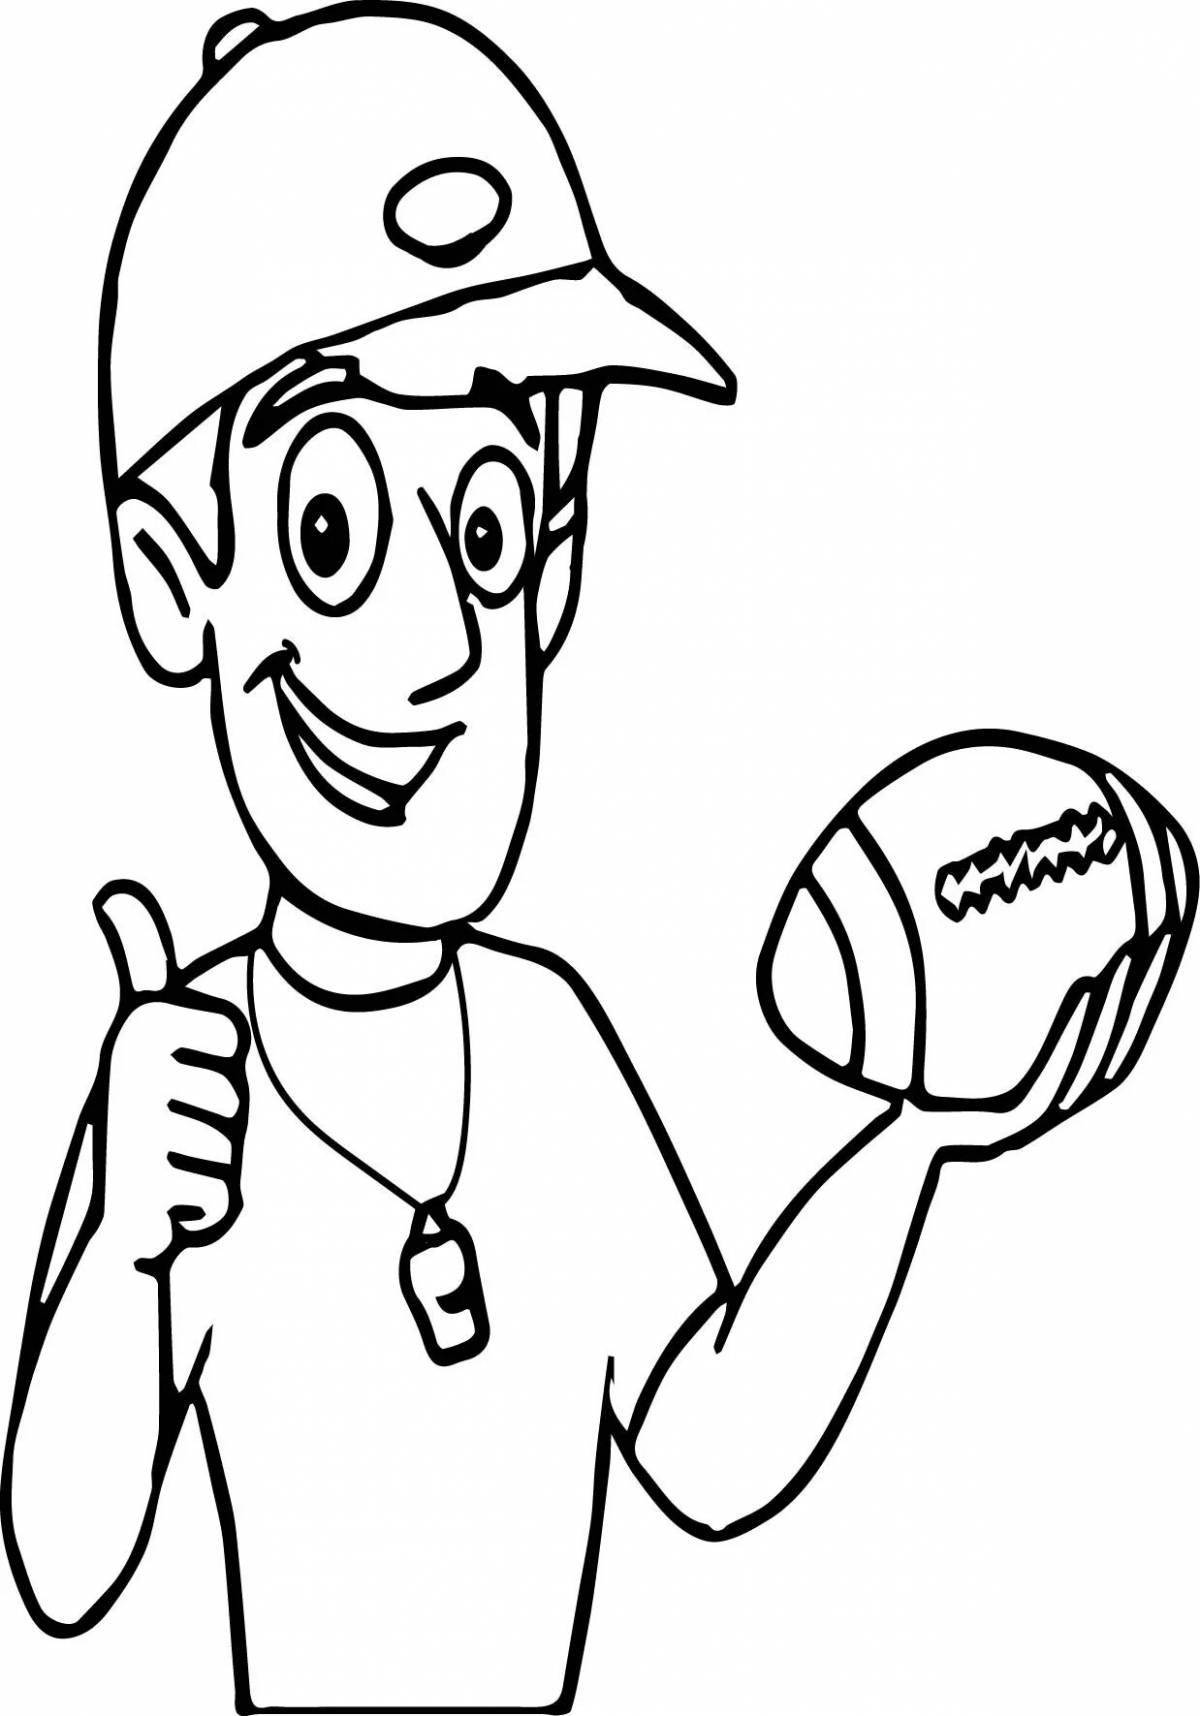 Glowing coach coloring page